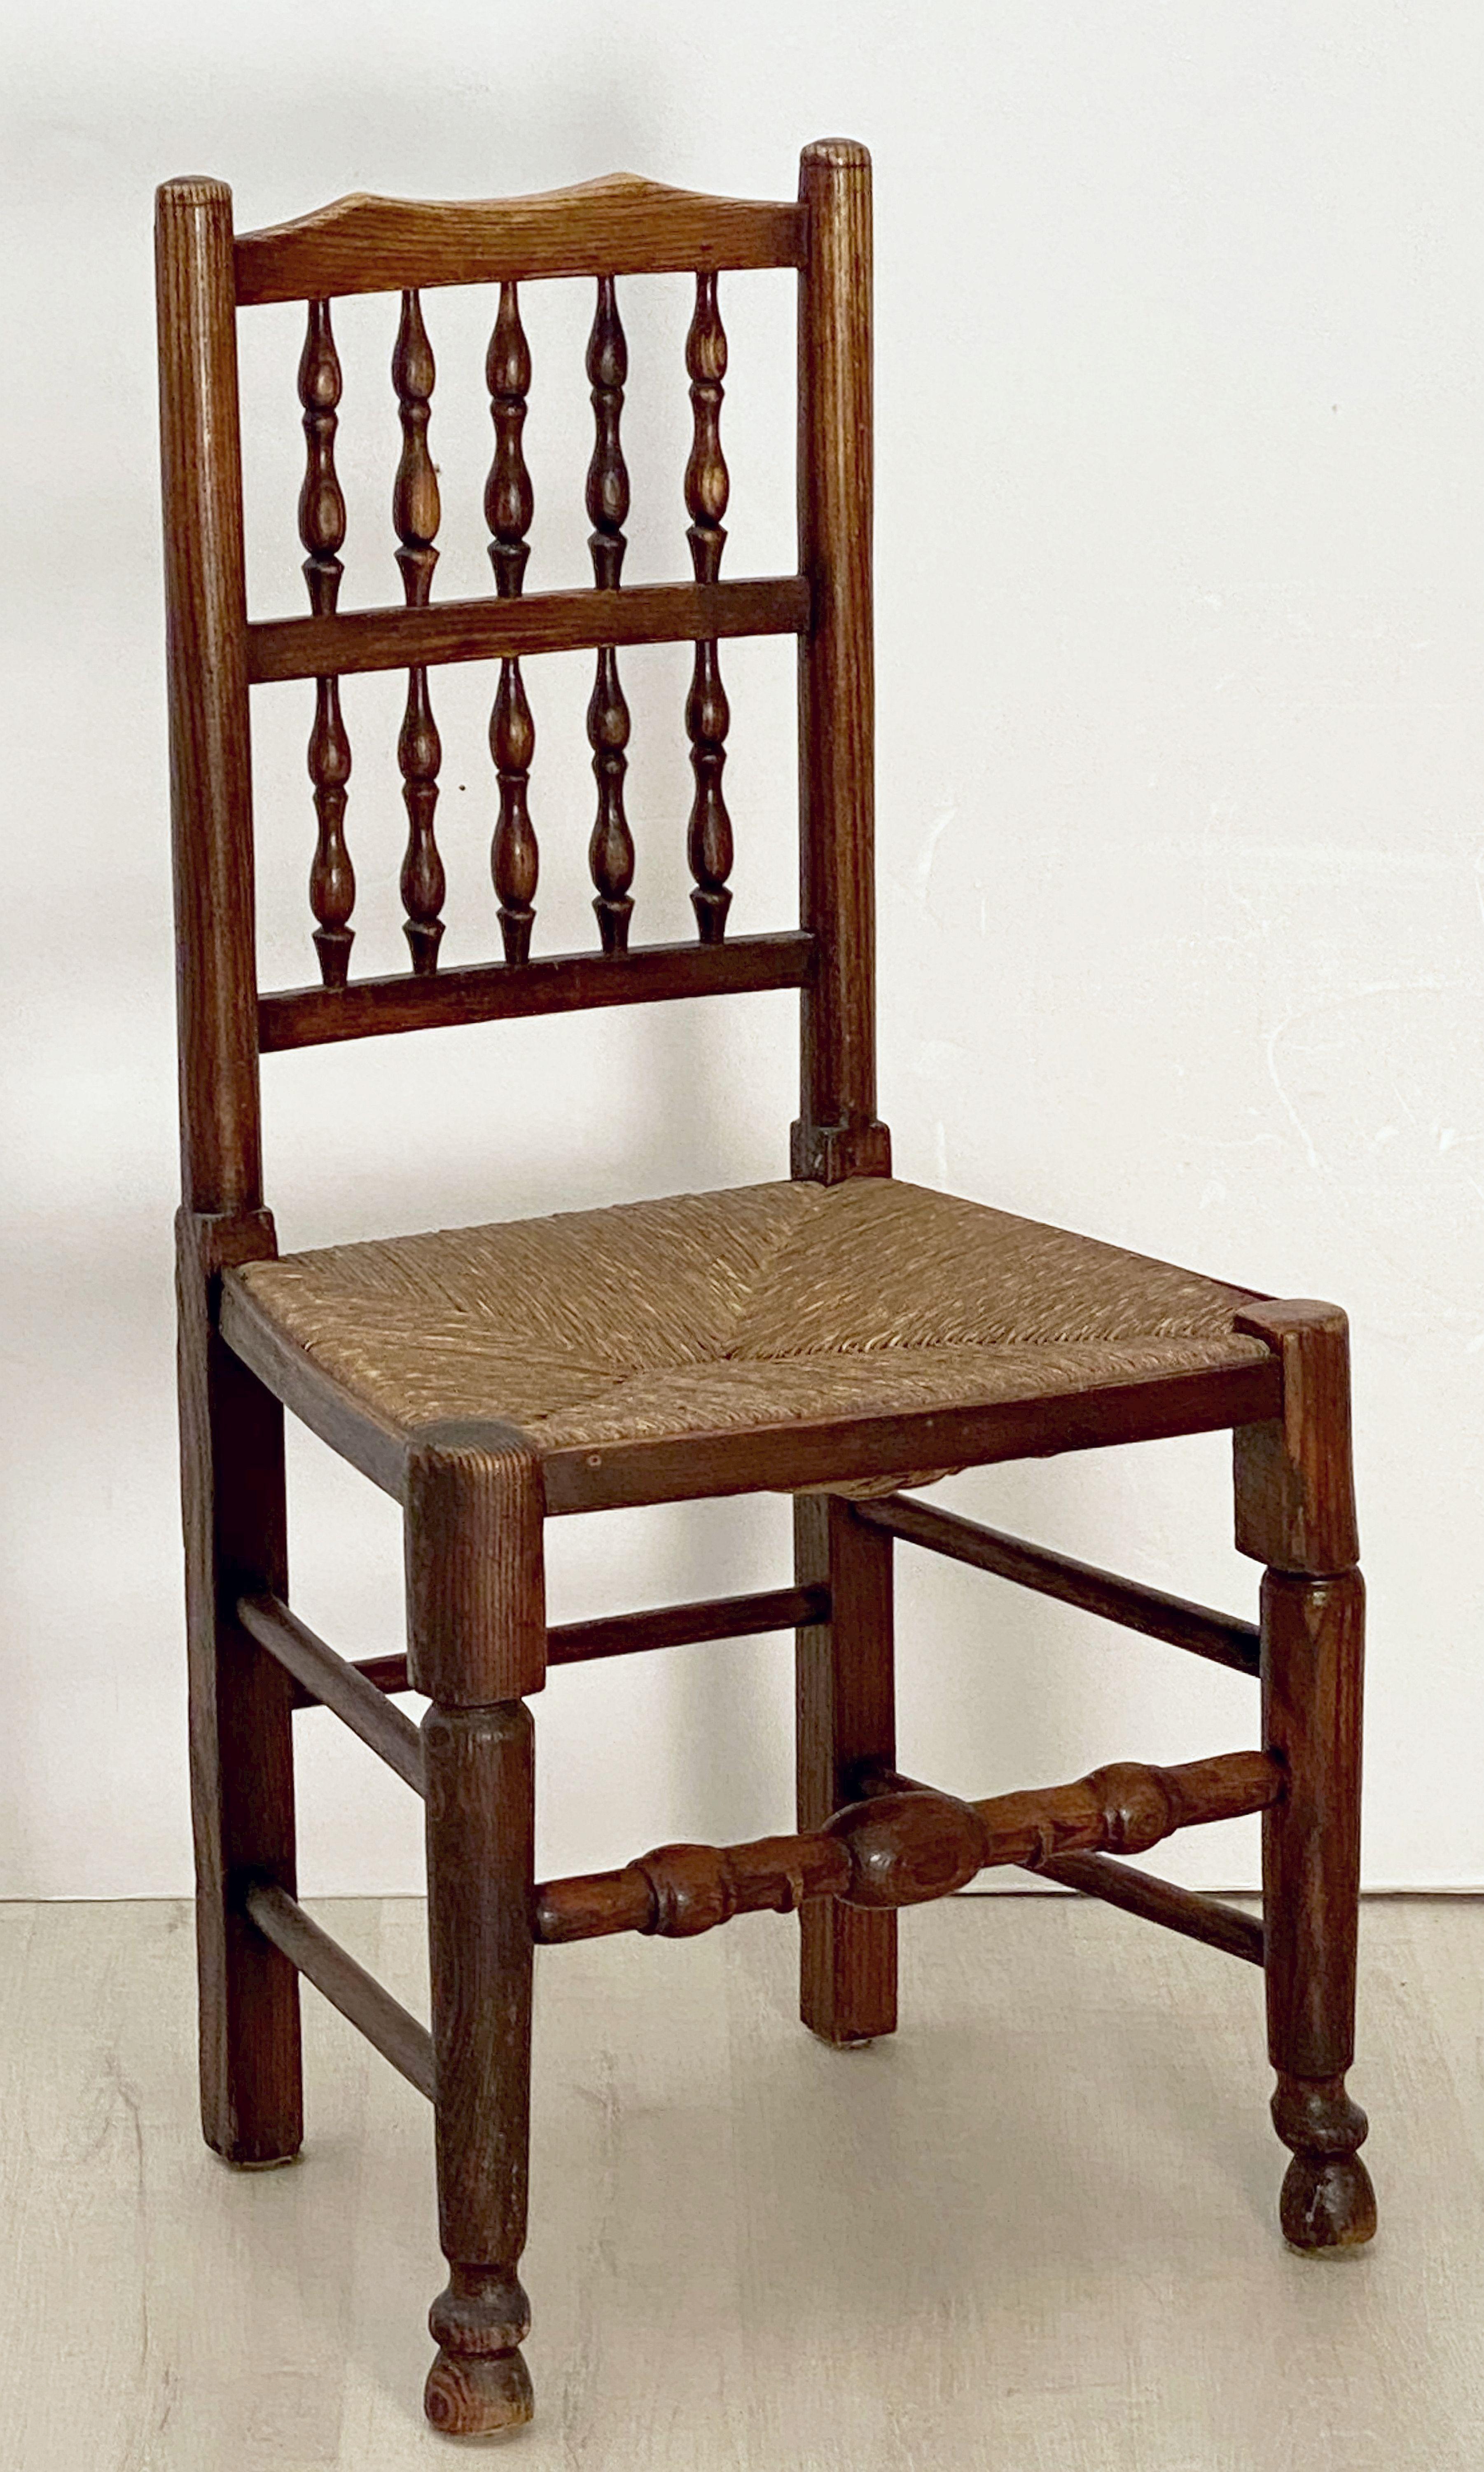 Turned Set of Four English Spindle-Back Rush Seat Chairs with Rush Seats